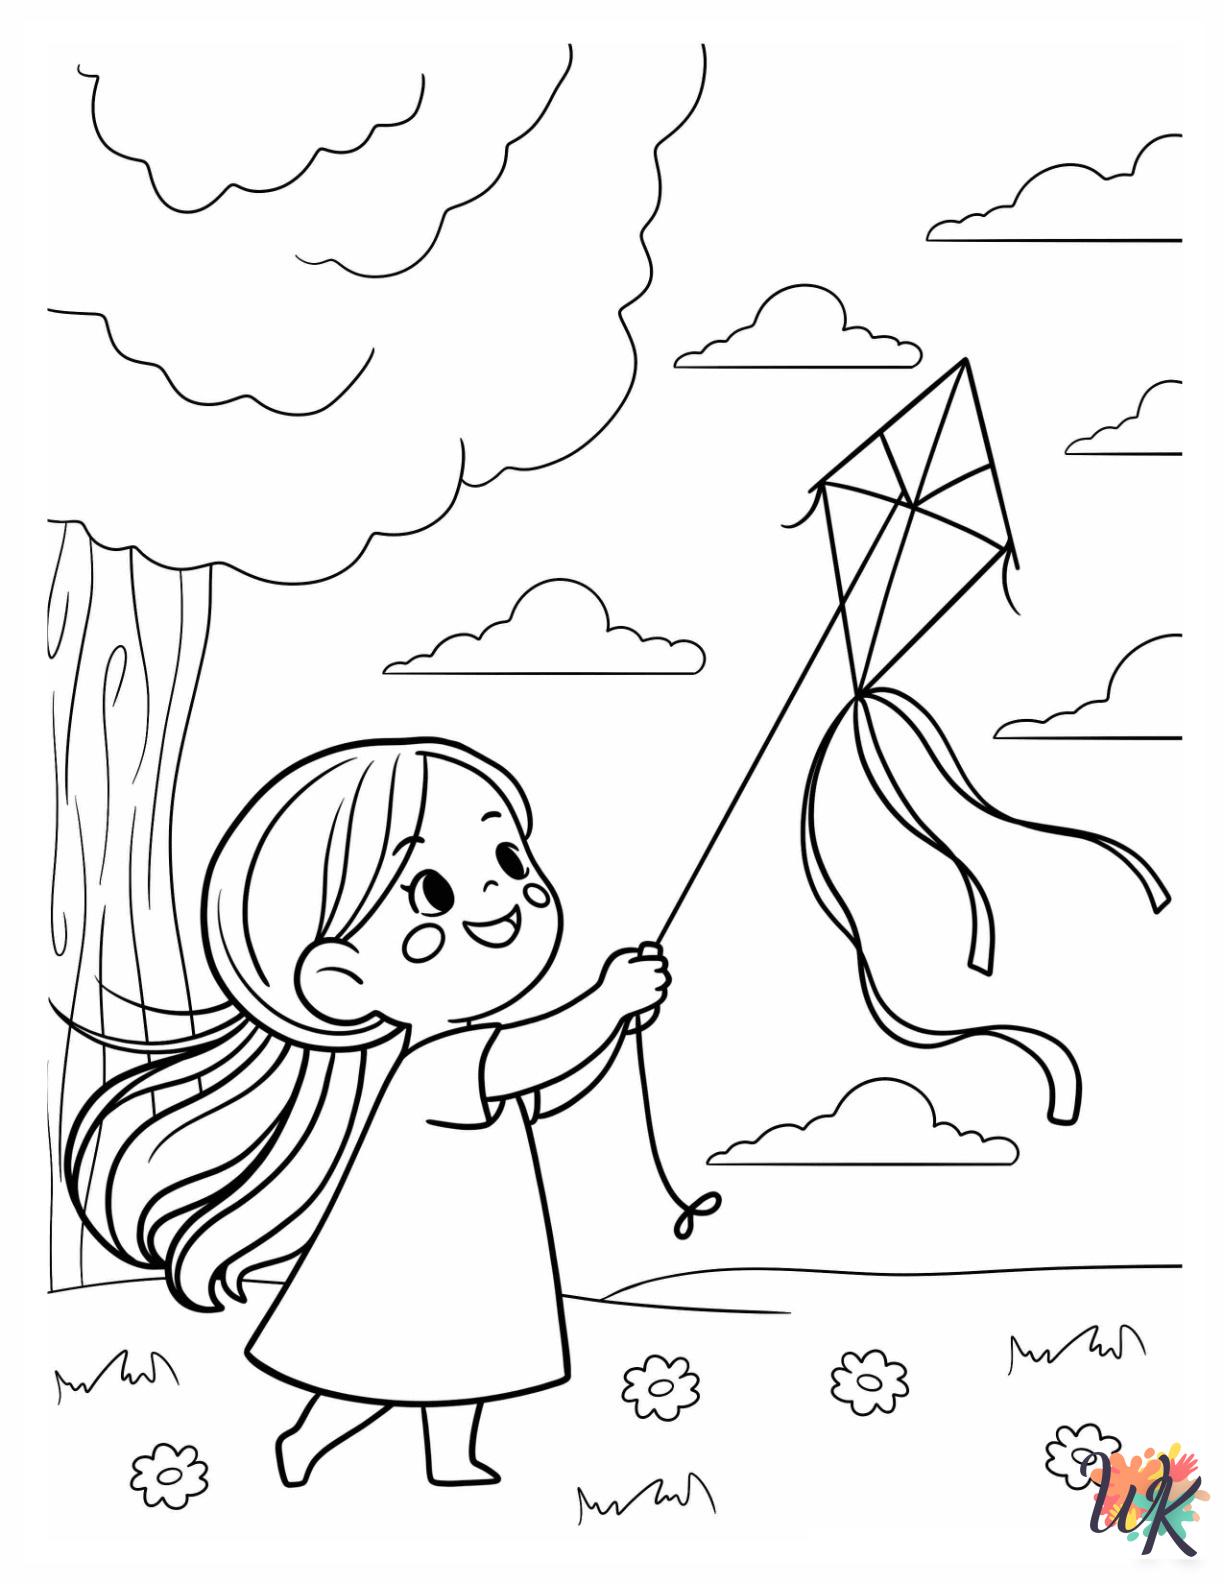 Kite Coloring Pages 17